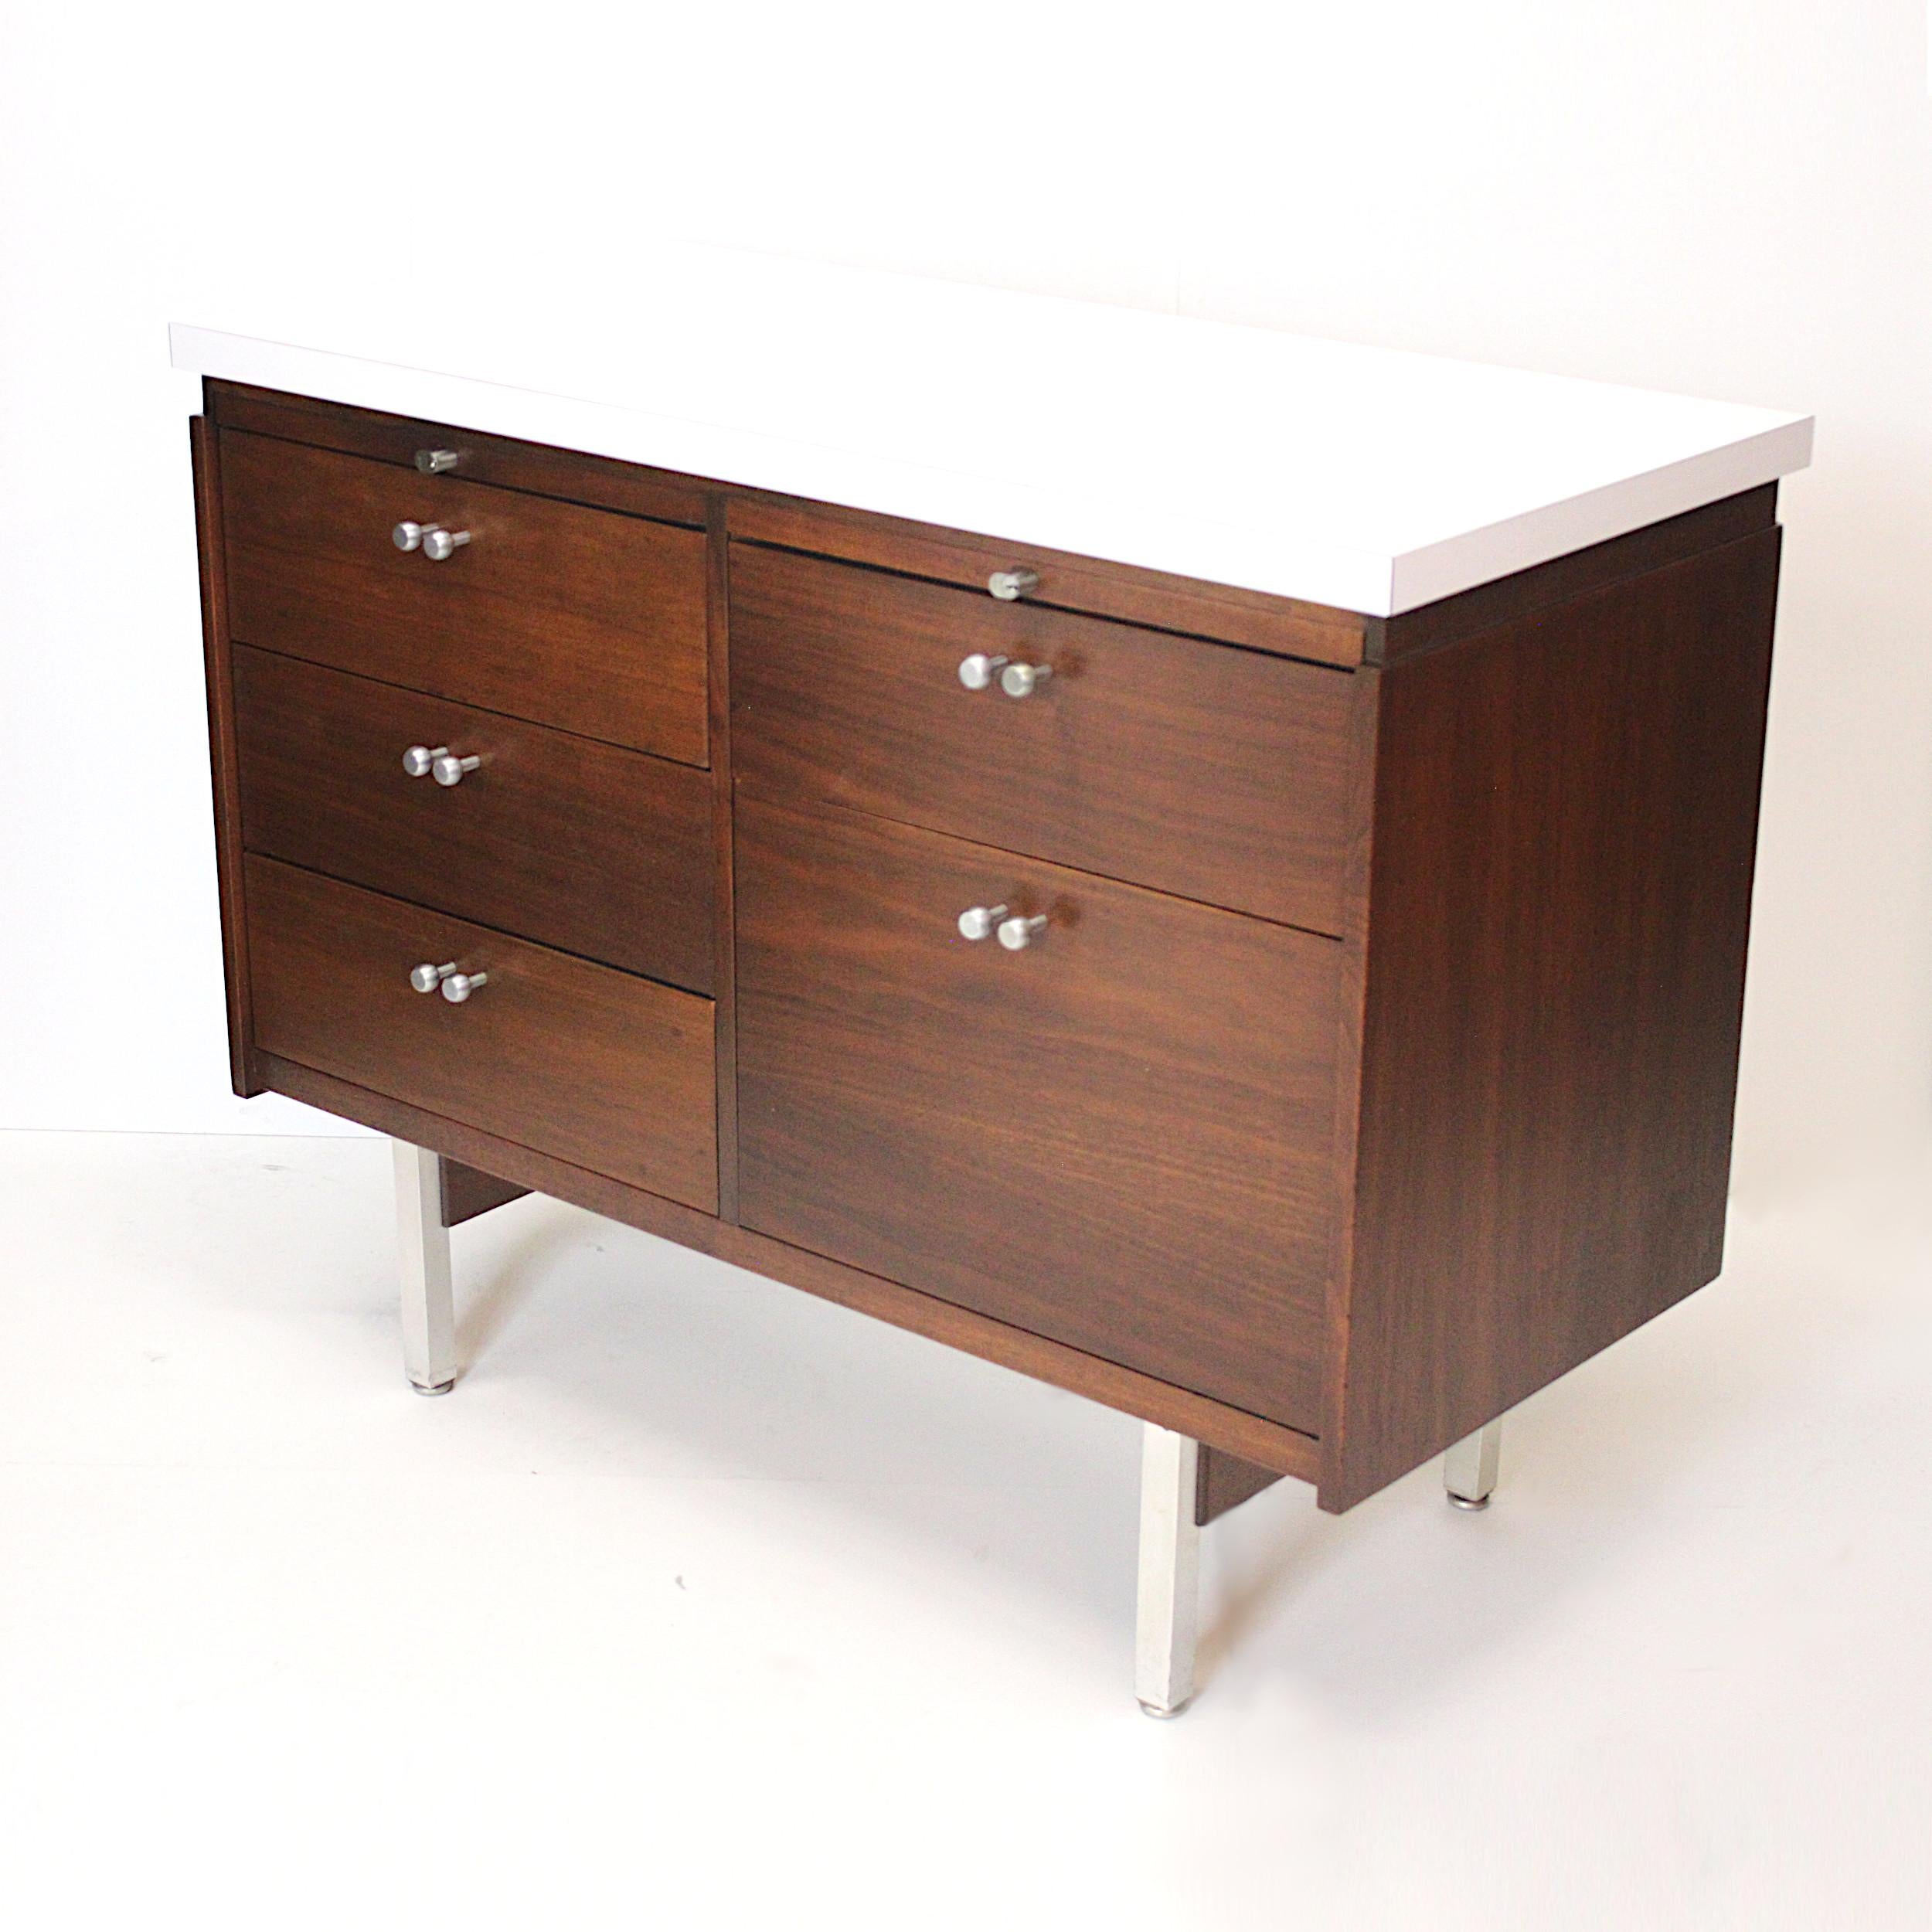 Mid-20th Century Matching Pair of Mid-Century Modern Walnut Console Cabinets by Charles Deaton